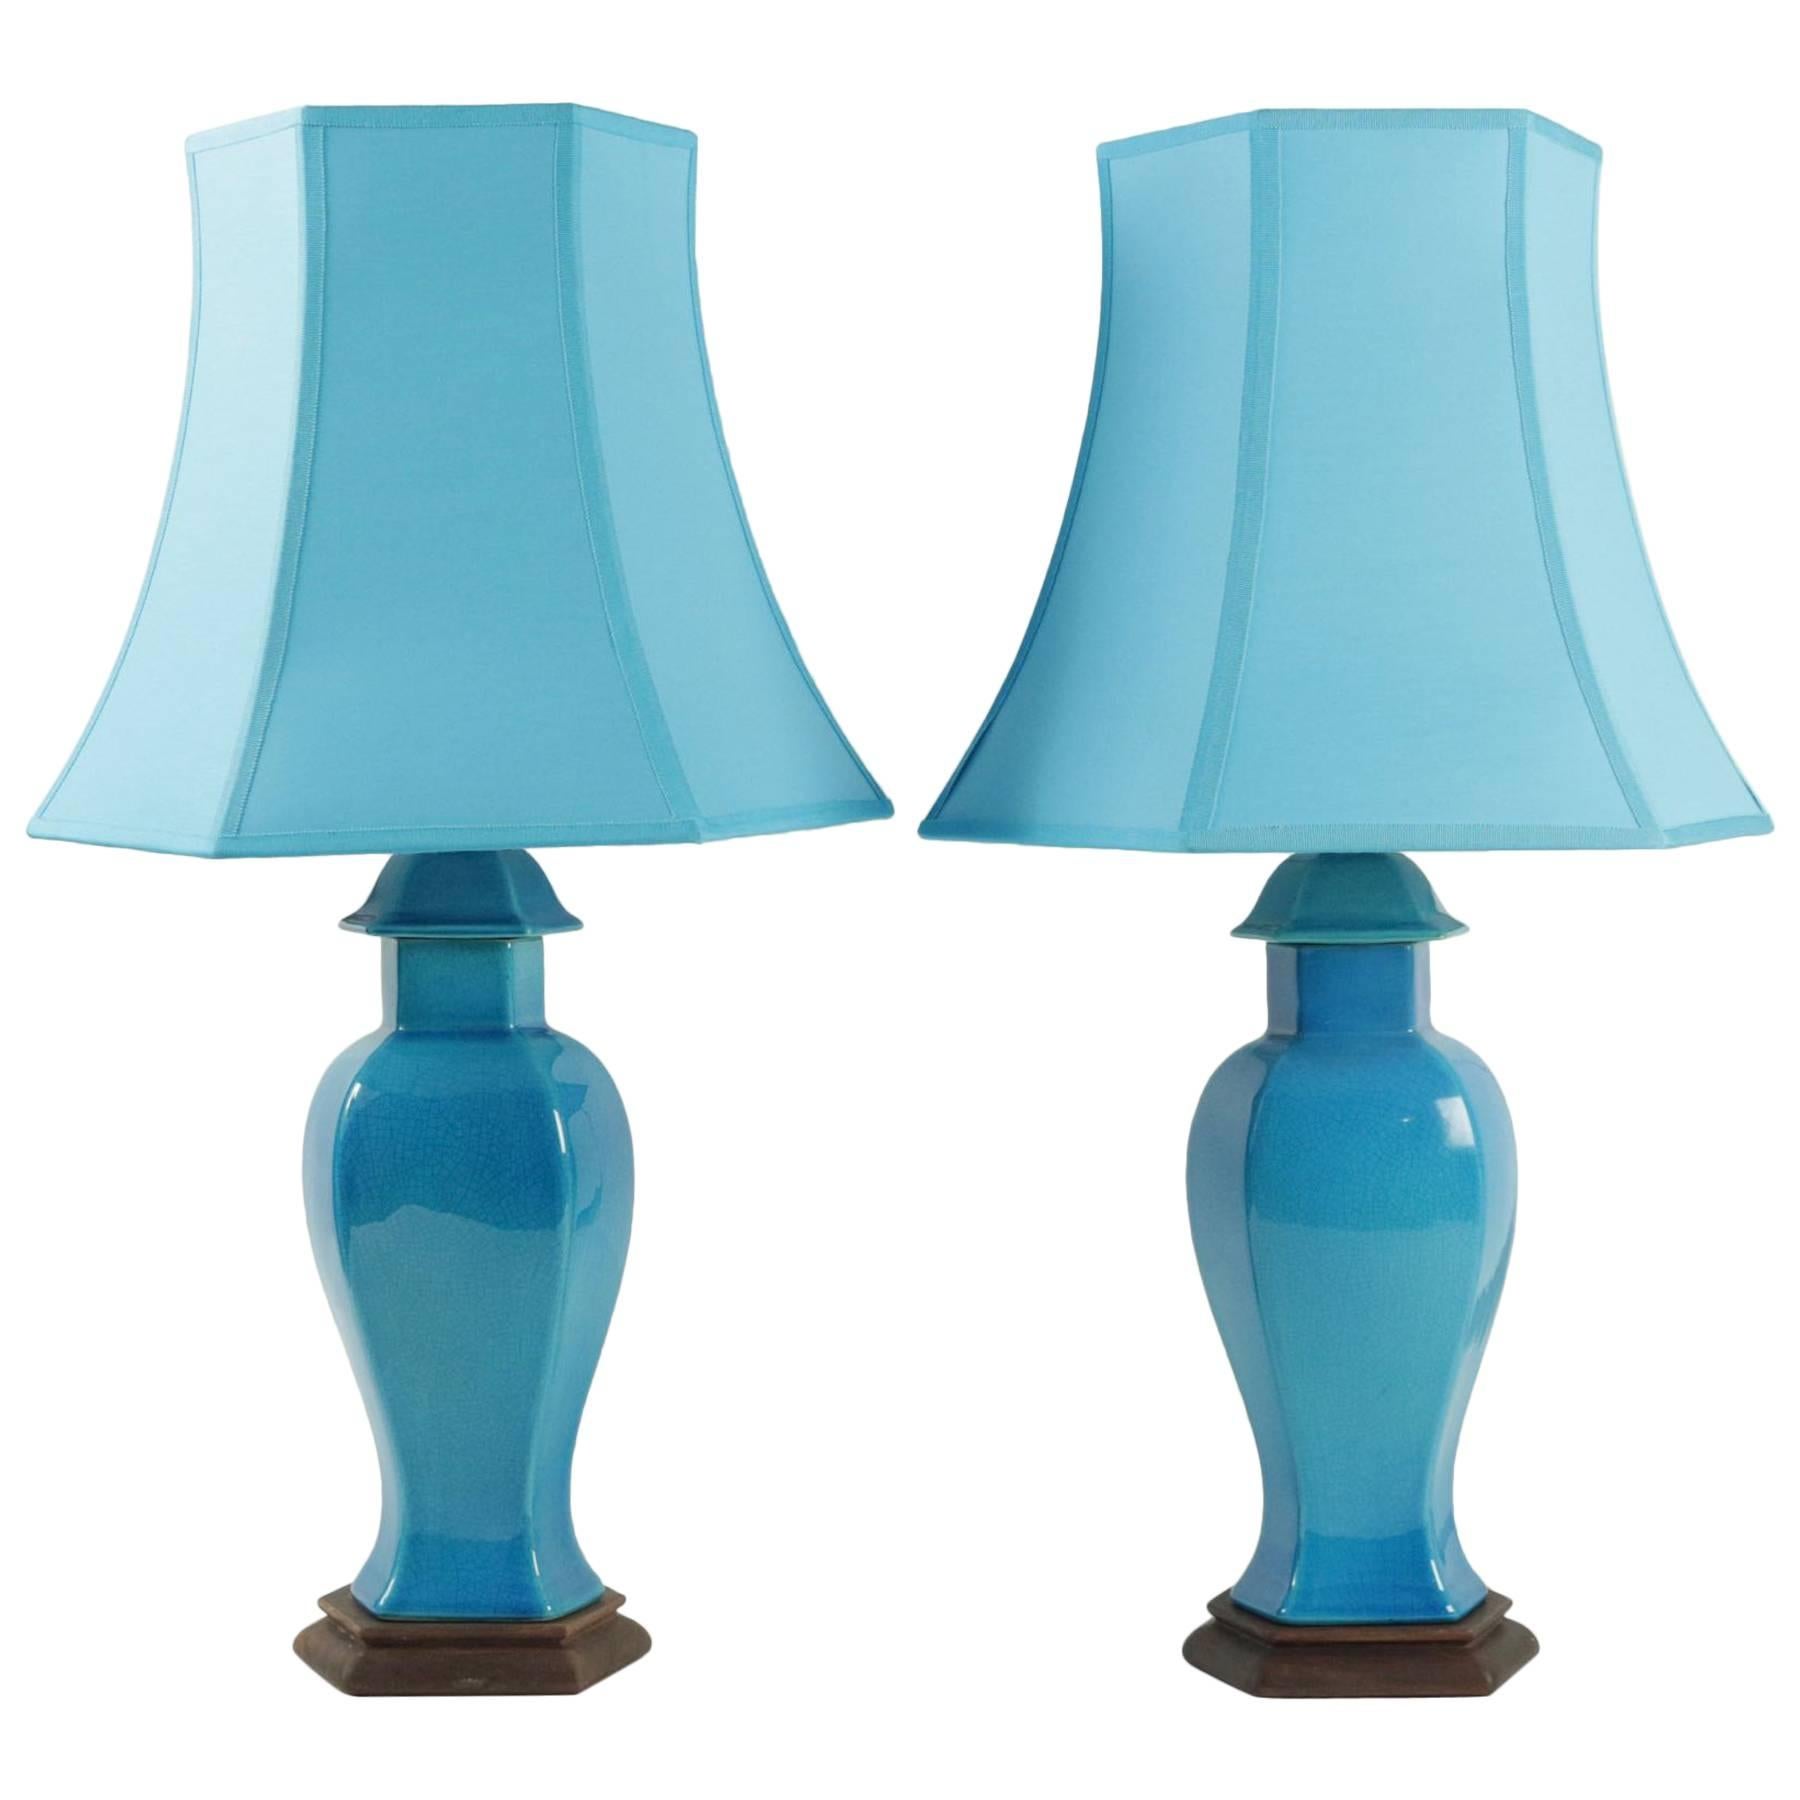 Pair of Blue Lamps in Pottery from the 19th Century, Chinese